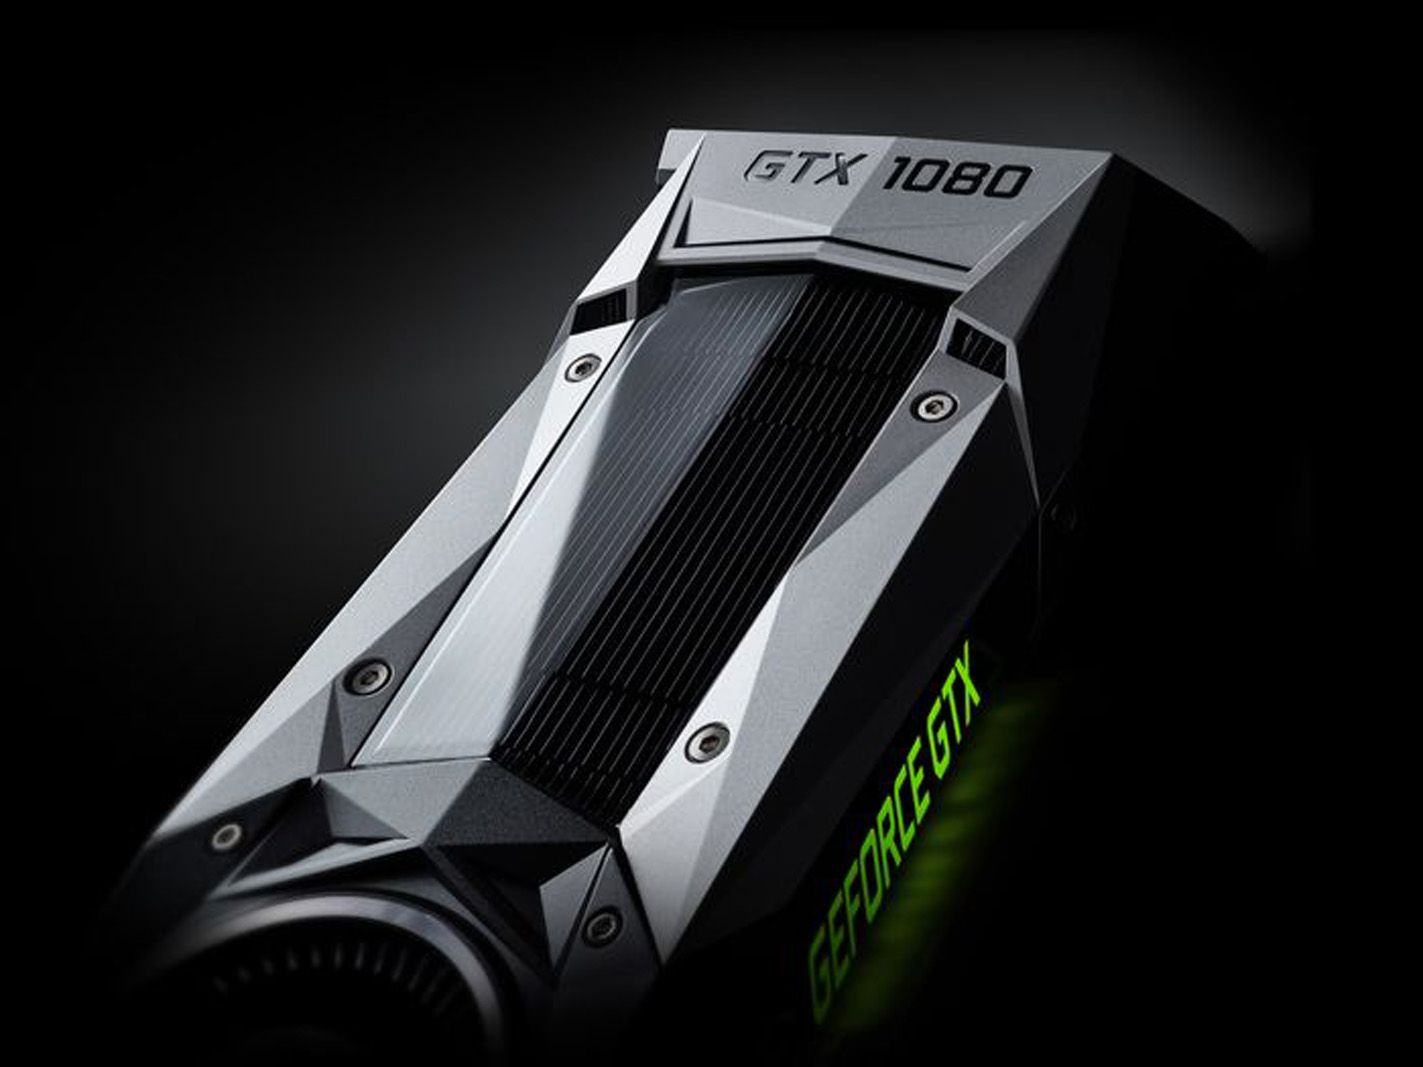 nvidia geforce gtx 1080 release date price and why it s the best gaming card ever image 1